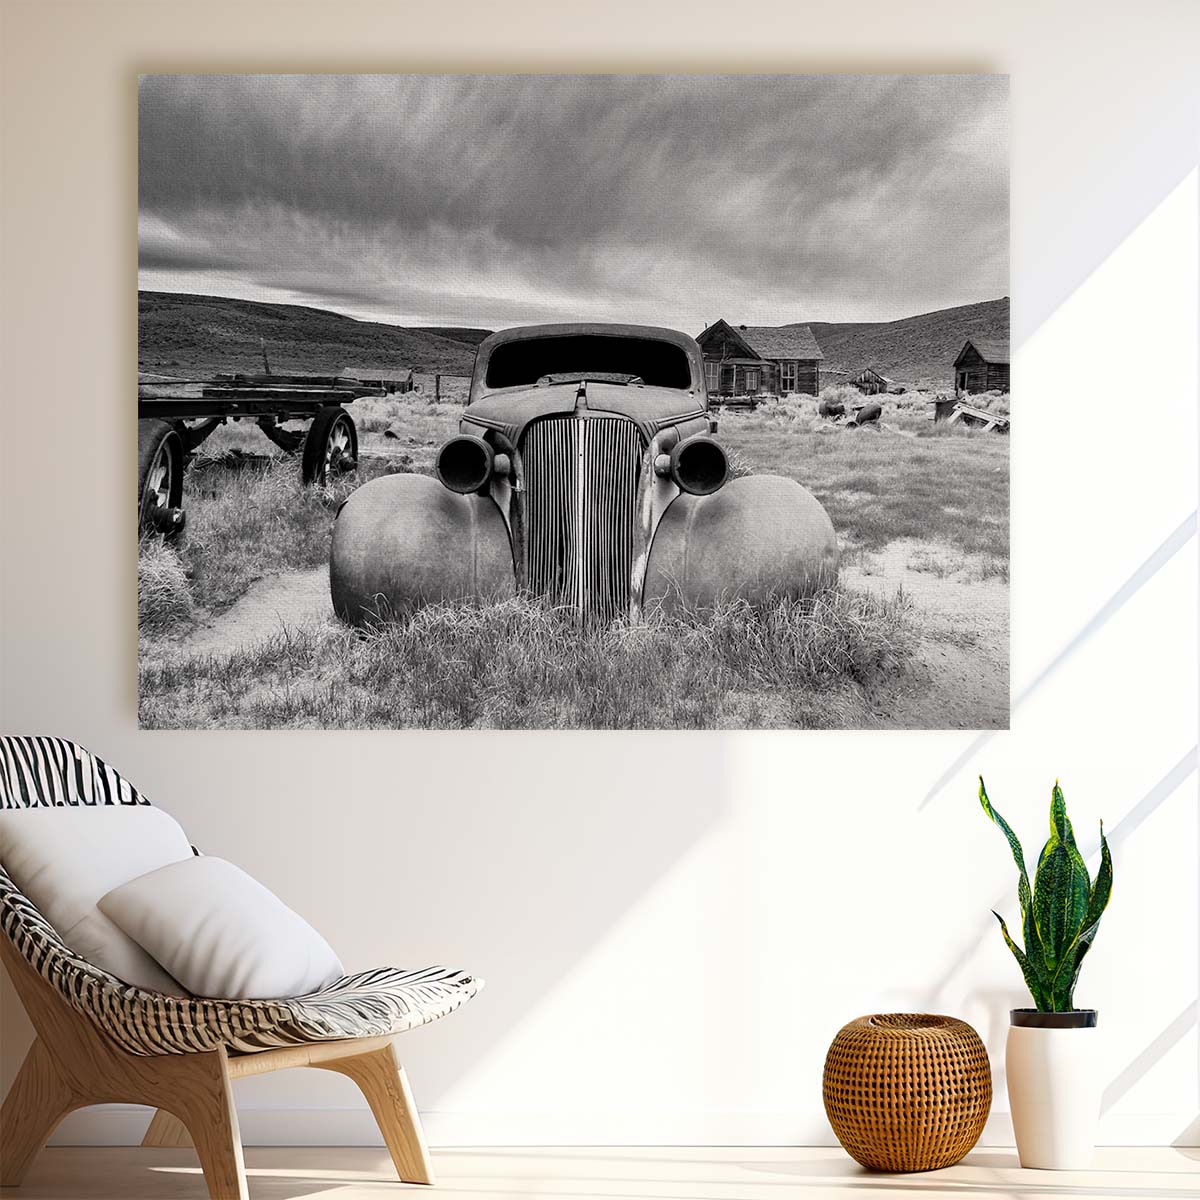 Vintage Abandoned Classic Car in Bodie, Monochrome Photography Wall Art